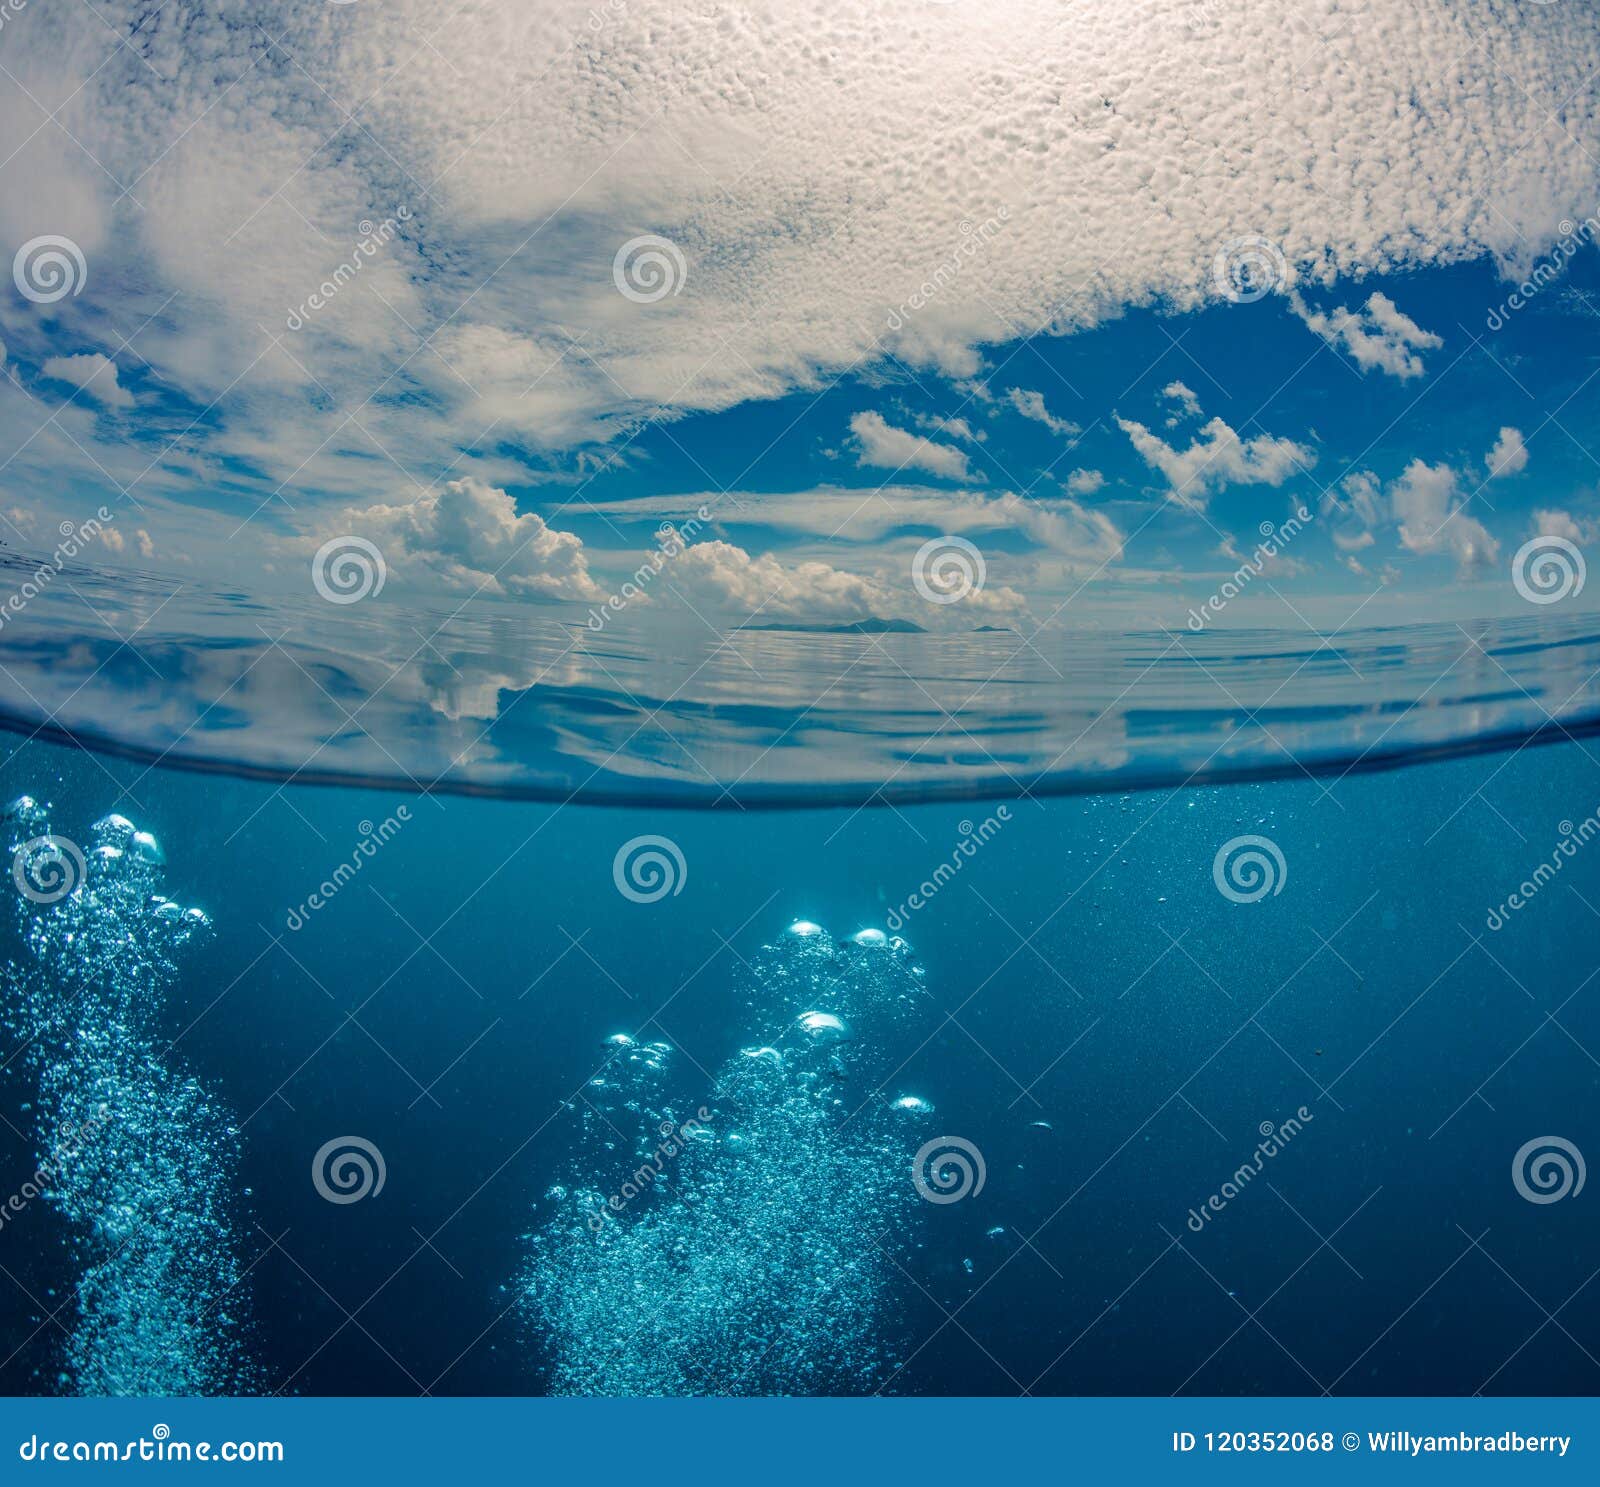 https://thumbs.dreamstime.com/z/peaceful-sea-background-calm-reflected-water-rich-clouds-air-bubbles-underwater-split-shot-blue-ocean-surface-120352068.jpg